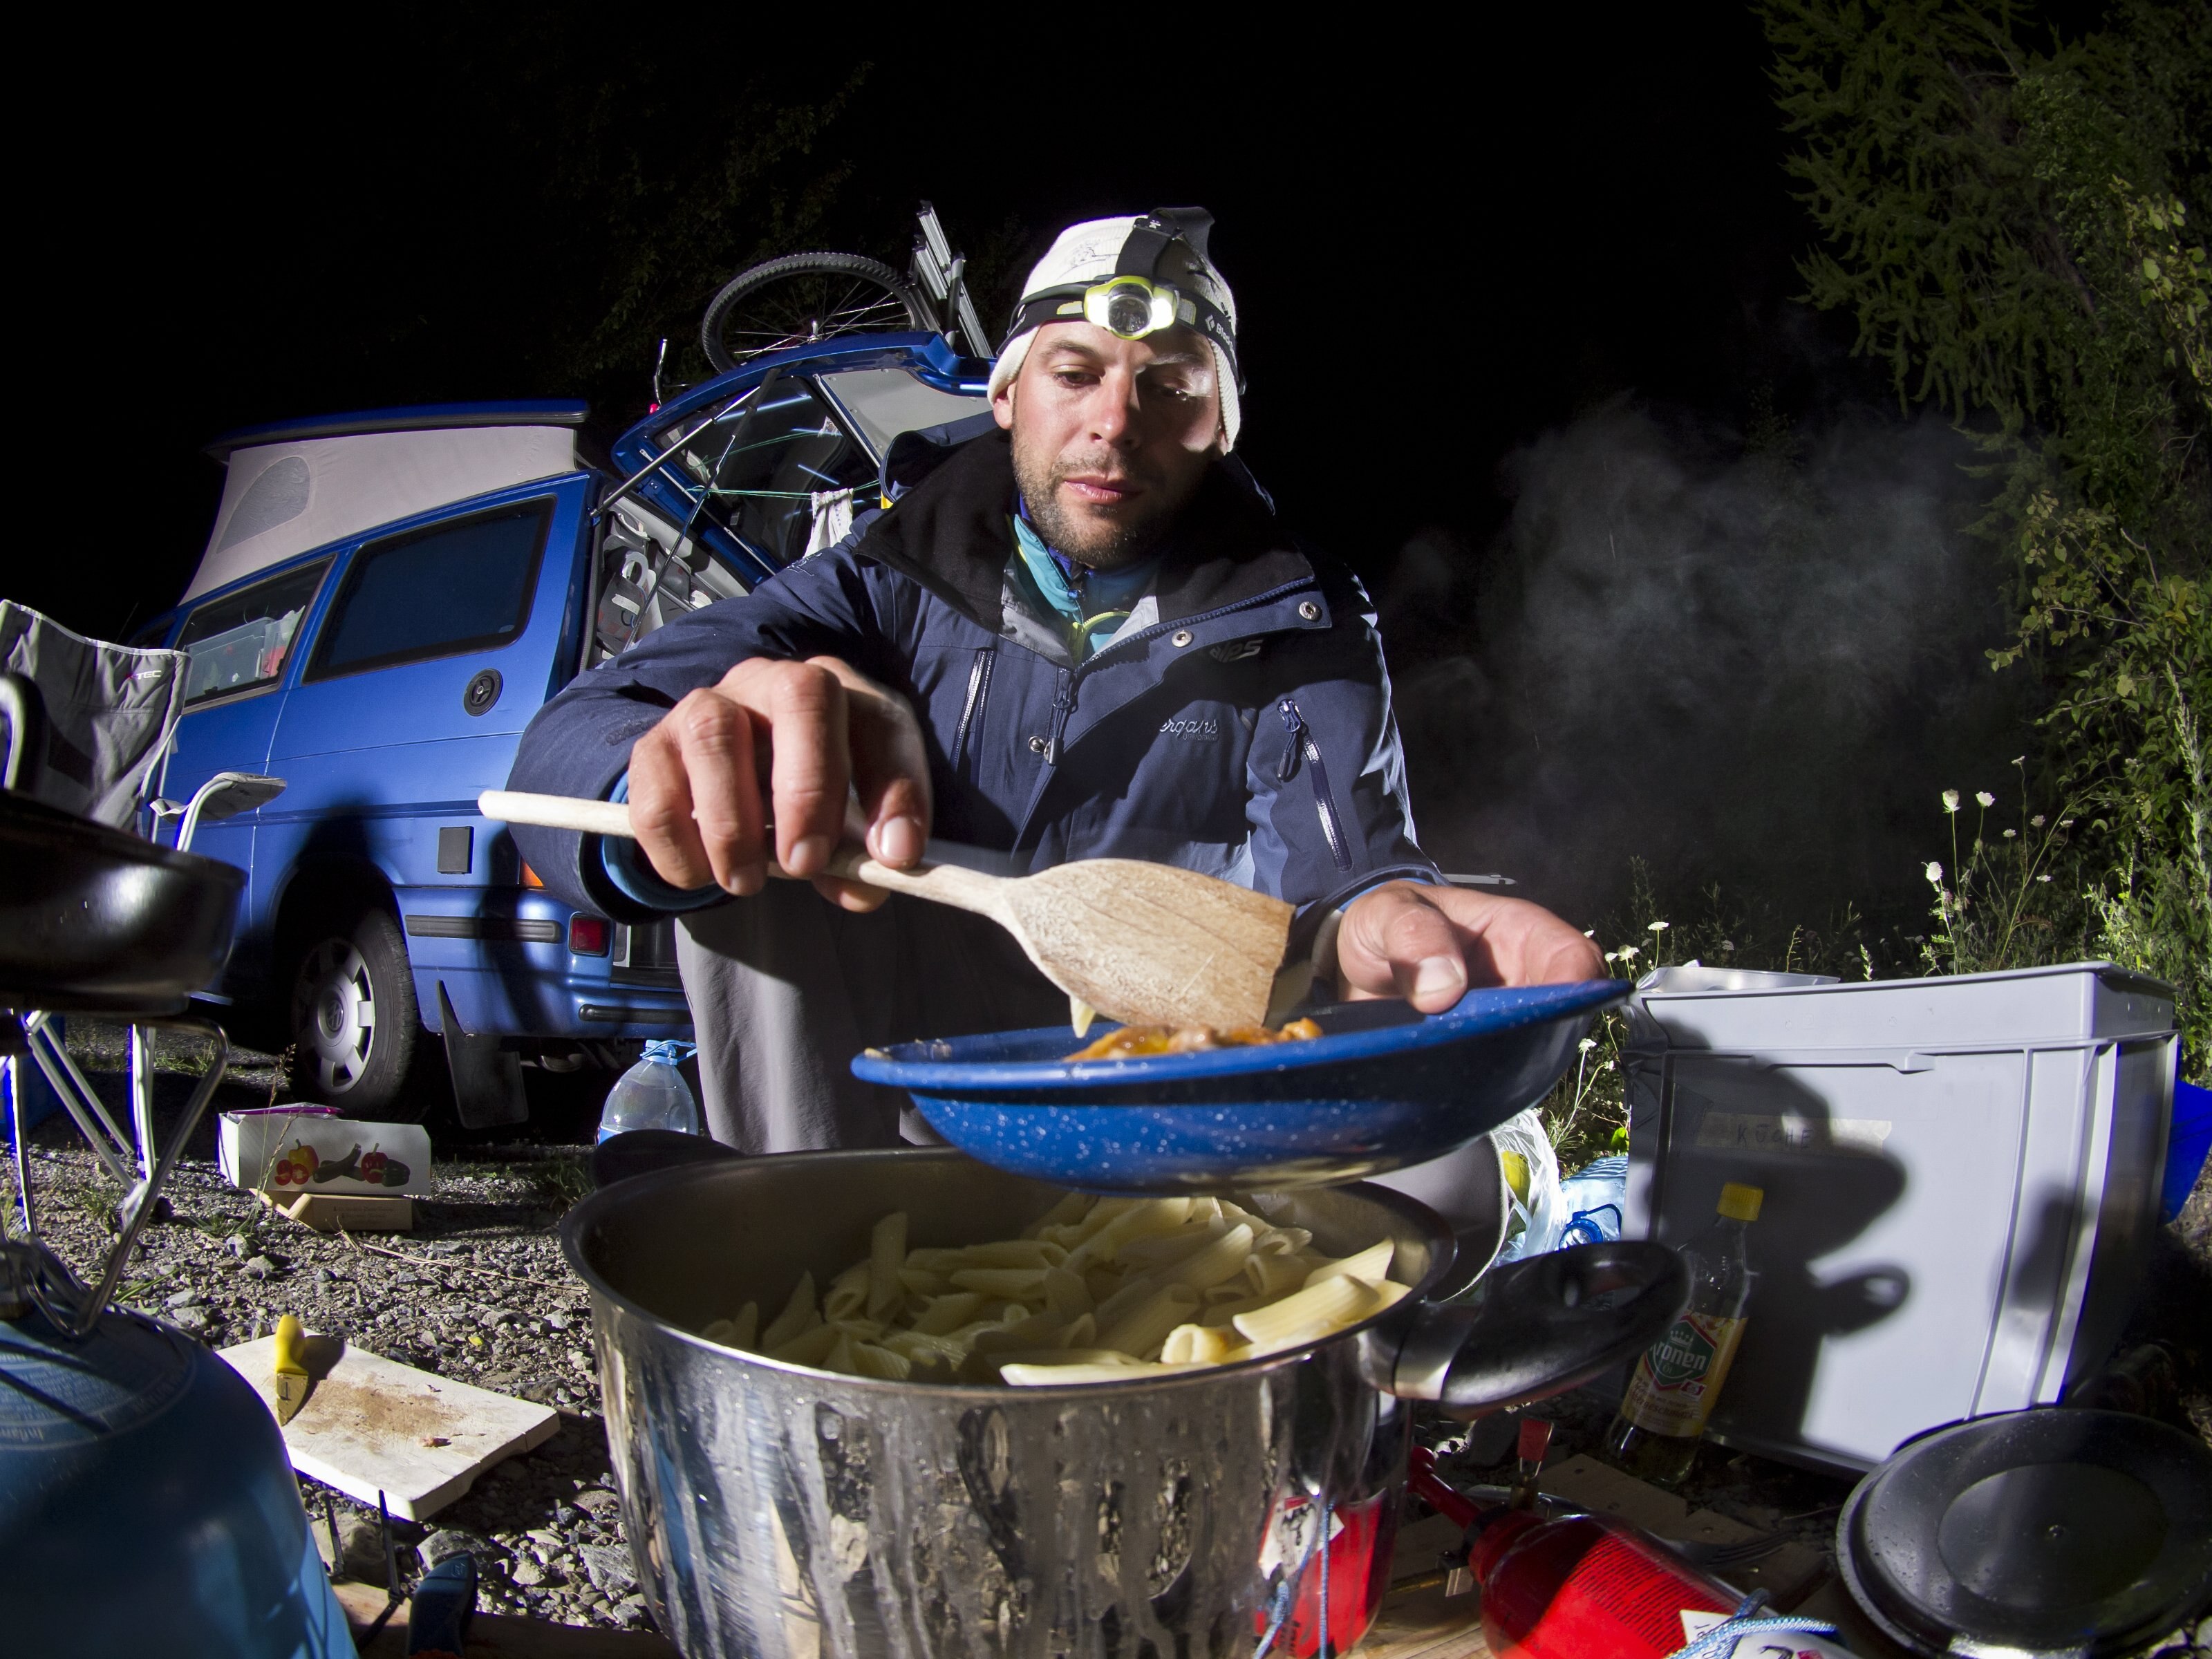 Christian Maurer's (SUI1) supporter Thomas makes dinner during the Red Bull X-Alps on July 25th, 2011 at Montricher - Albanne in France. // Vitek Ludvik/Red Bull Content Pool // SI201107260233 // Usage for editorial use only //